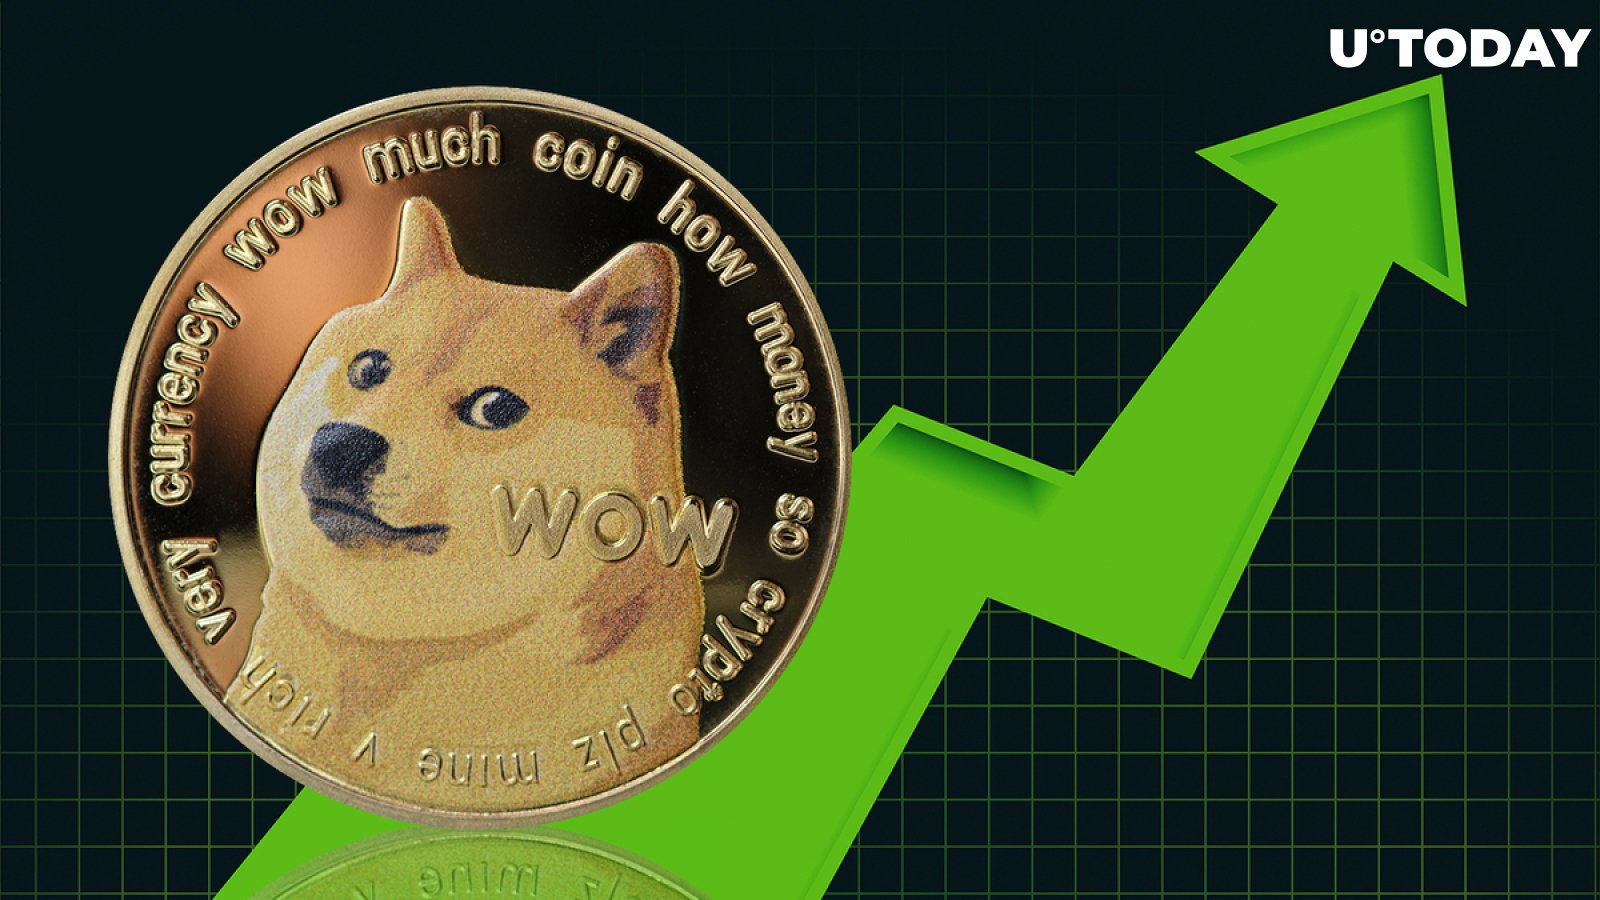 Dogecoin (DOGE) Joins Altcoin Push, Here's Its Growth Driver